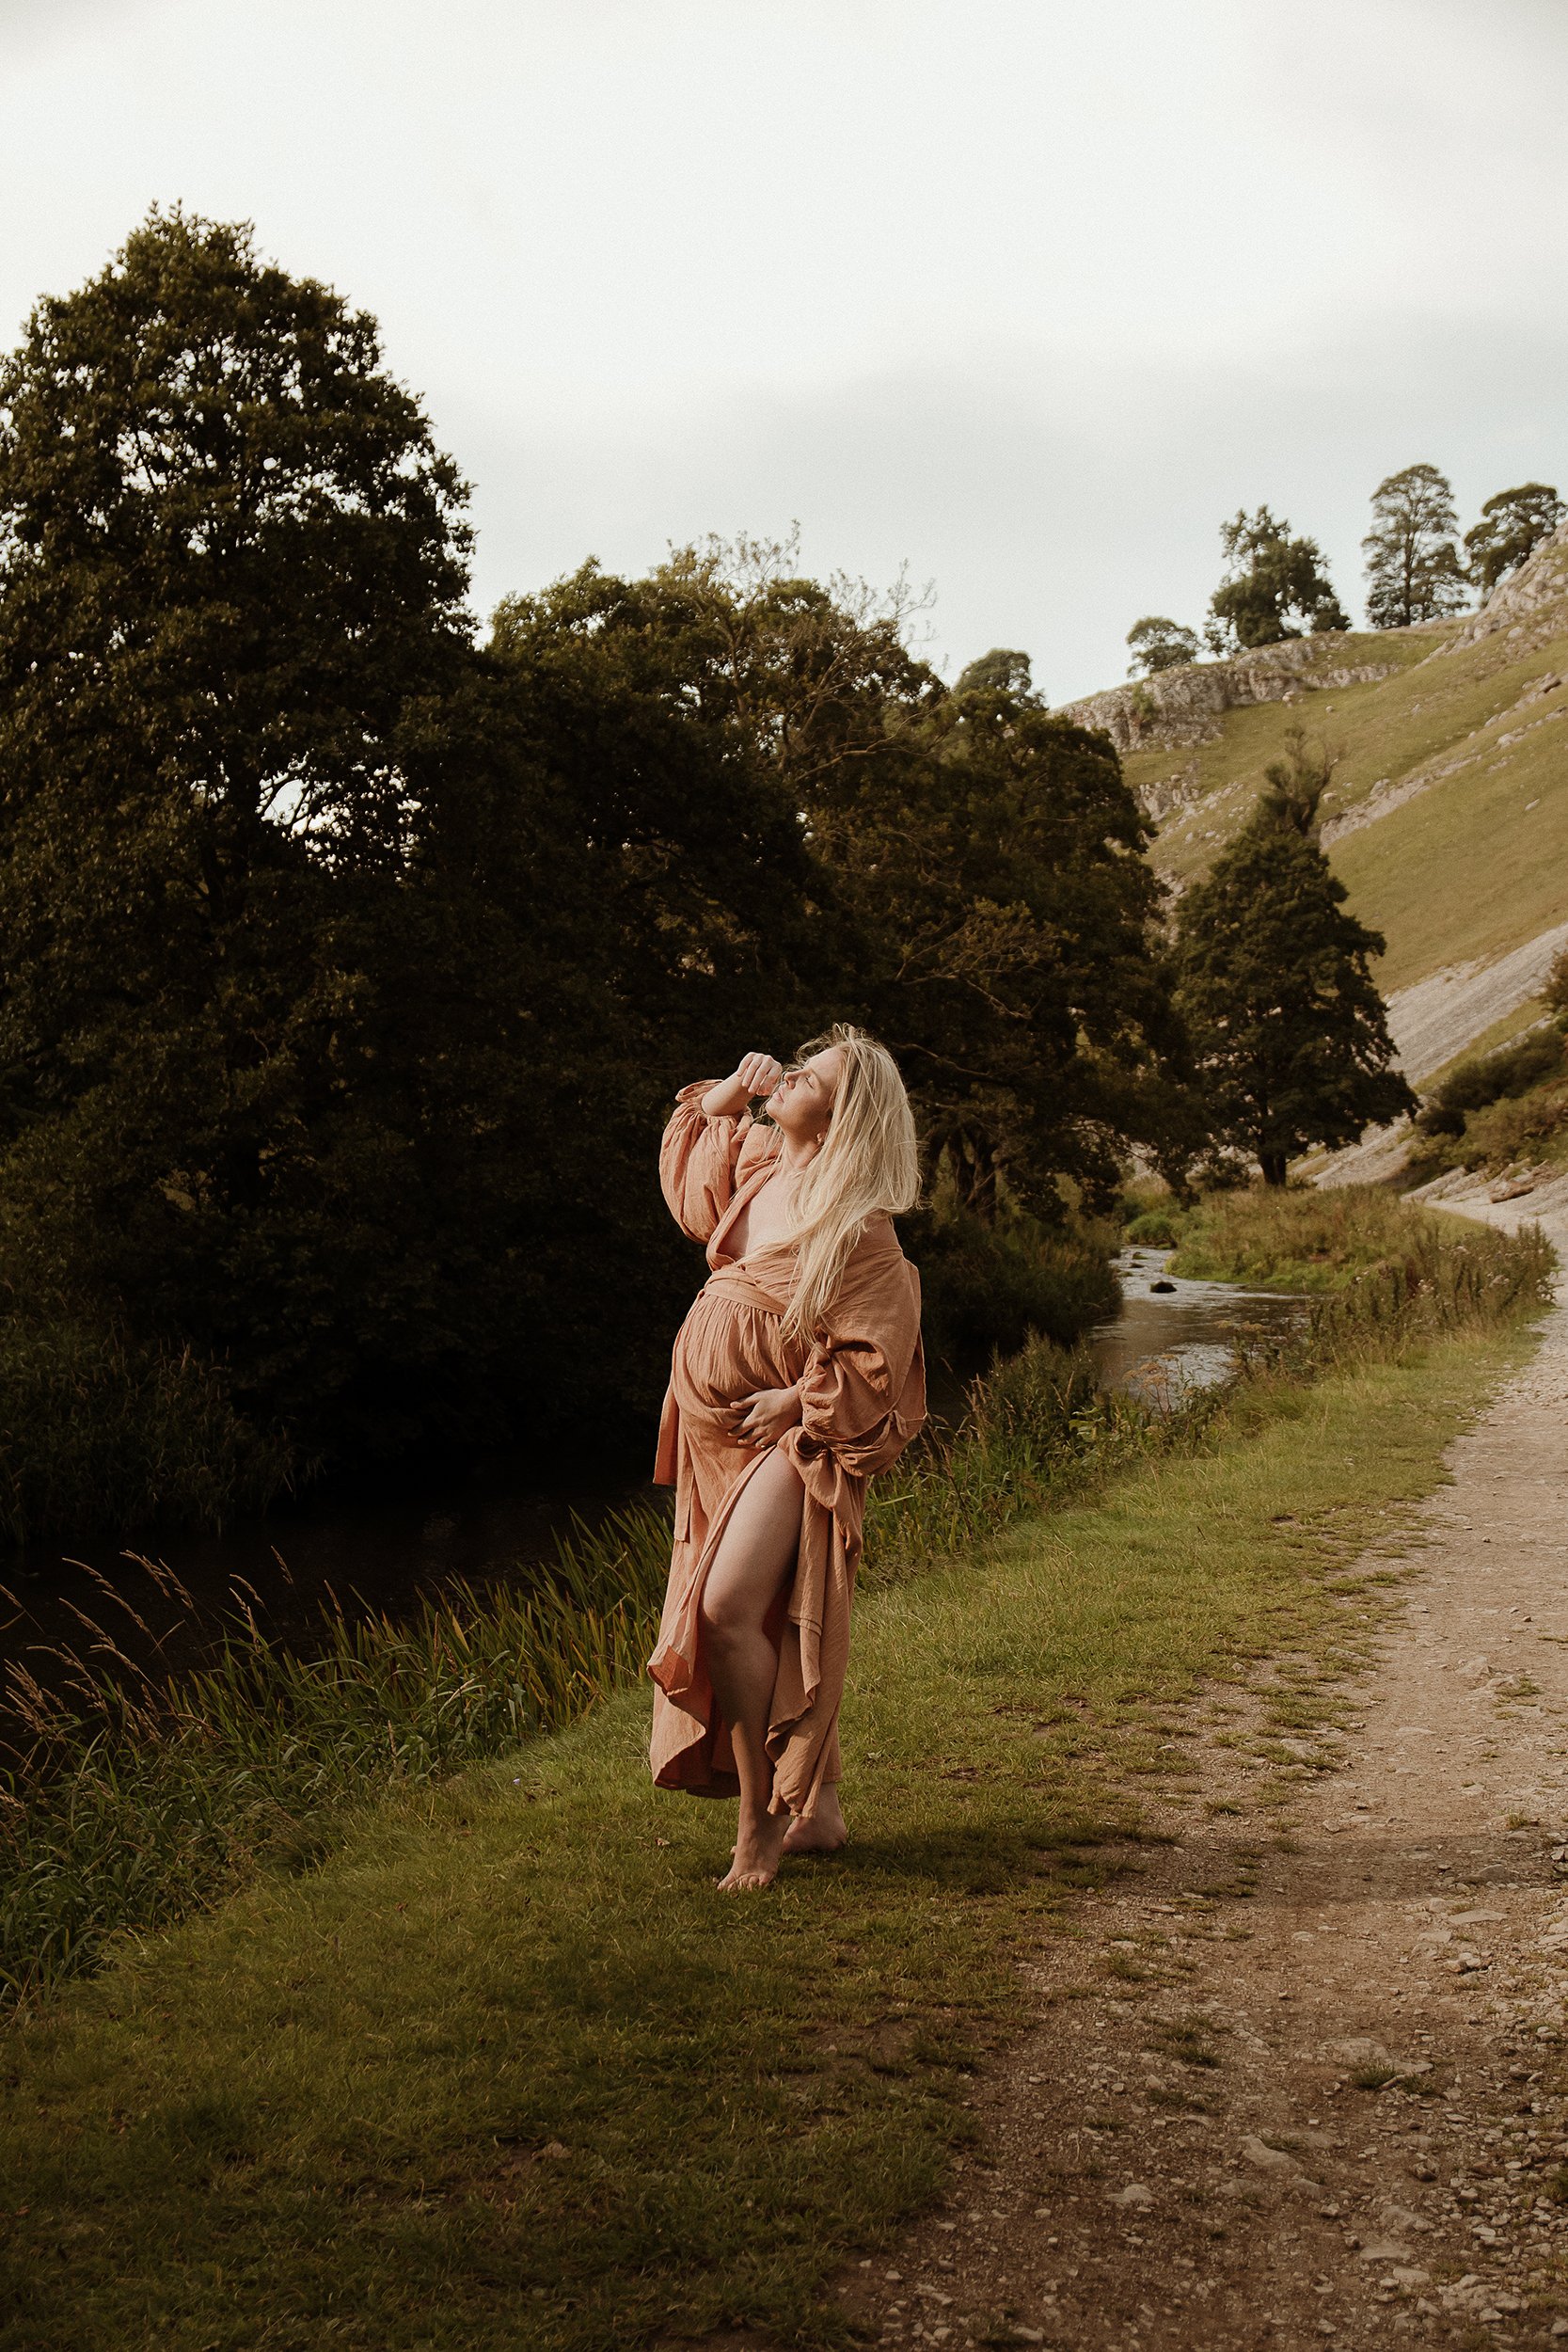 theuntoldphoto worcestershire outdoor forest maternity lifestyle photography session